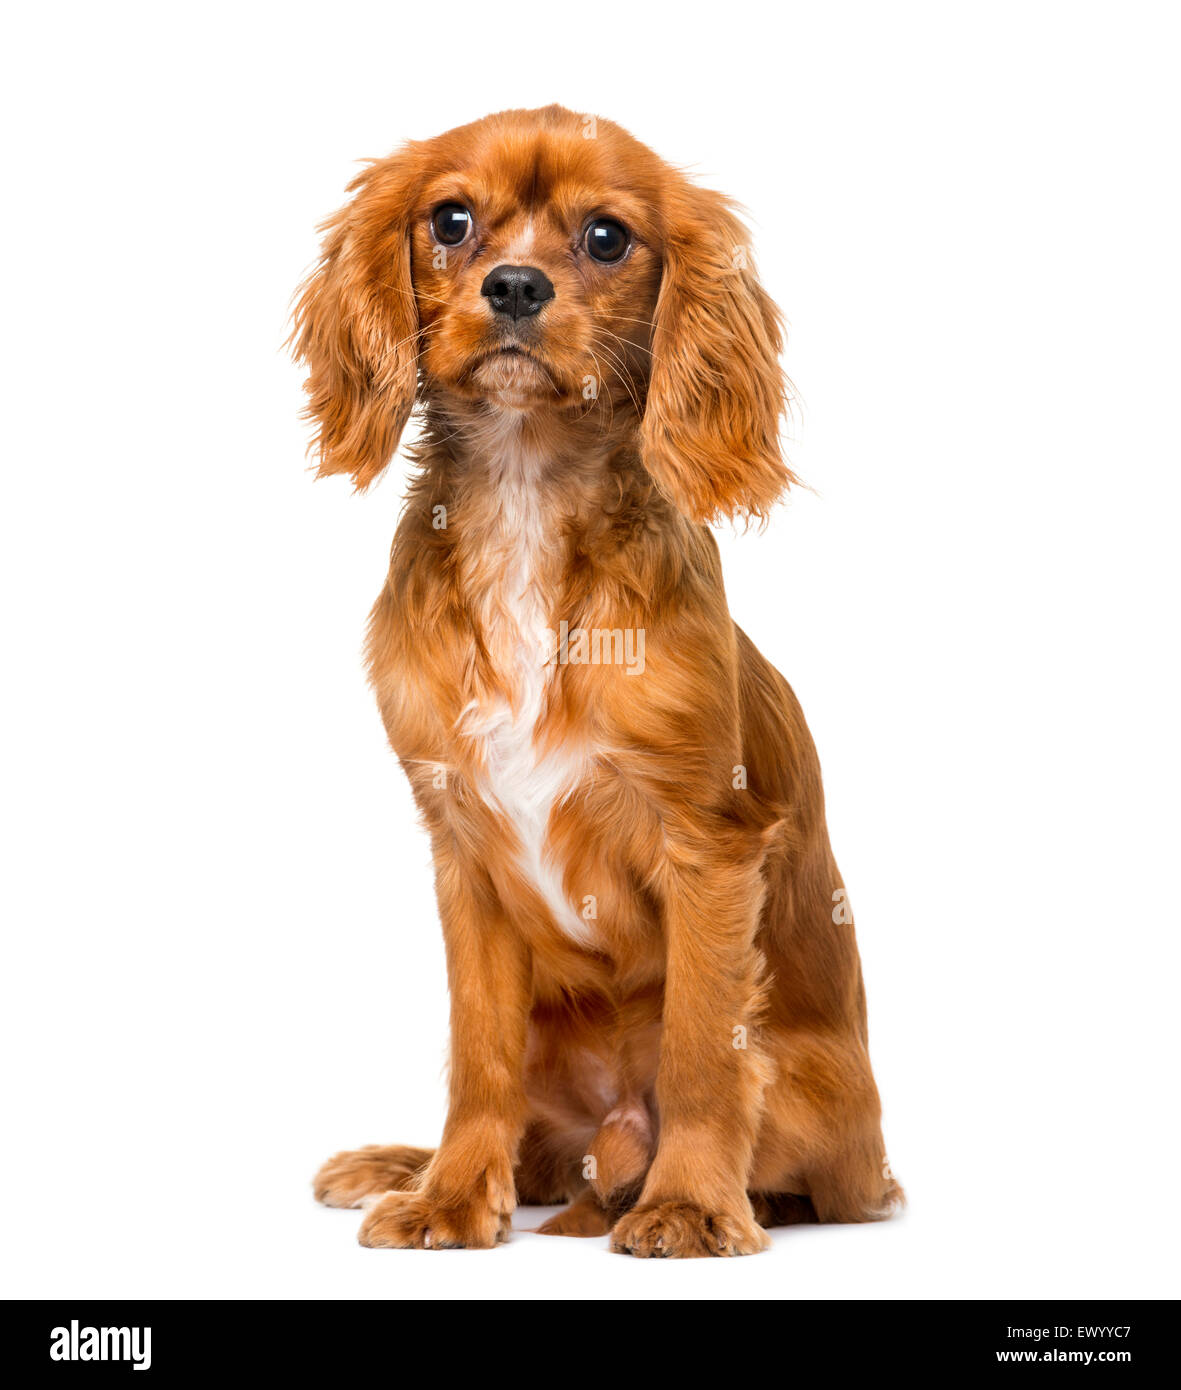 Cavalier King Charles Spaniel 8 Months Old In Front Of A White